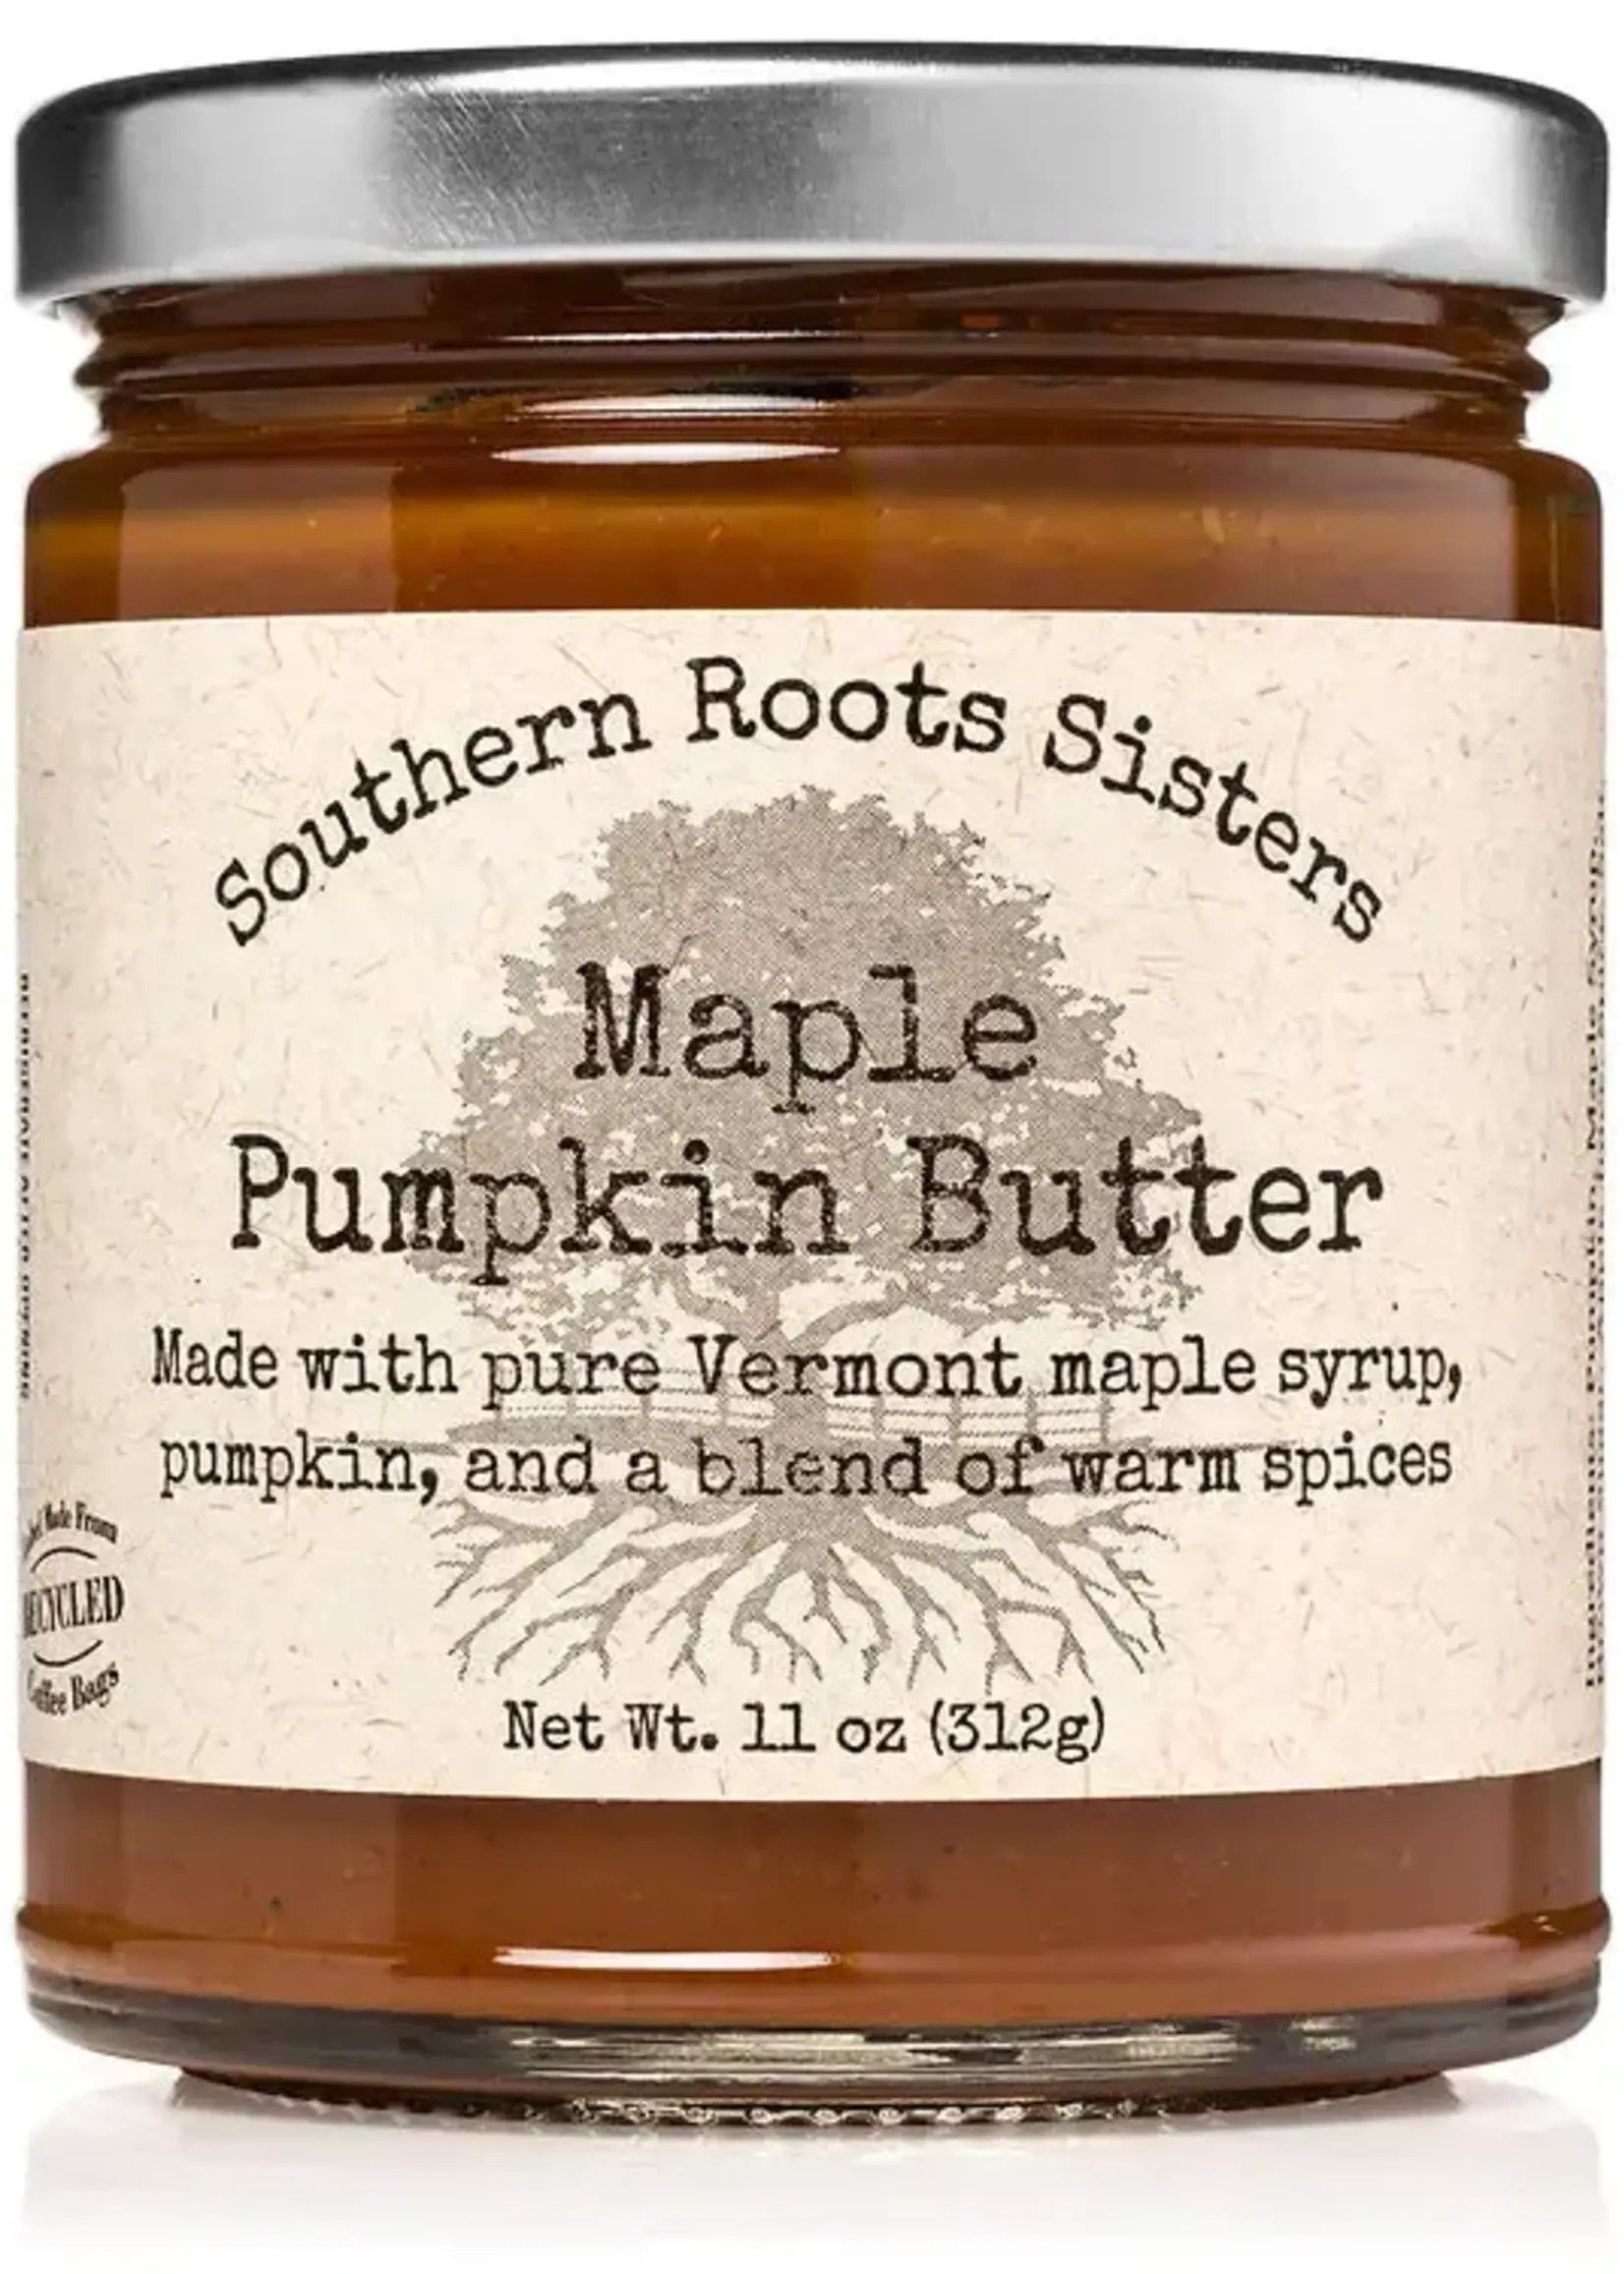 Southern Roots Sisters Maple Pumpkin Butter